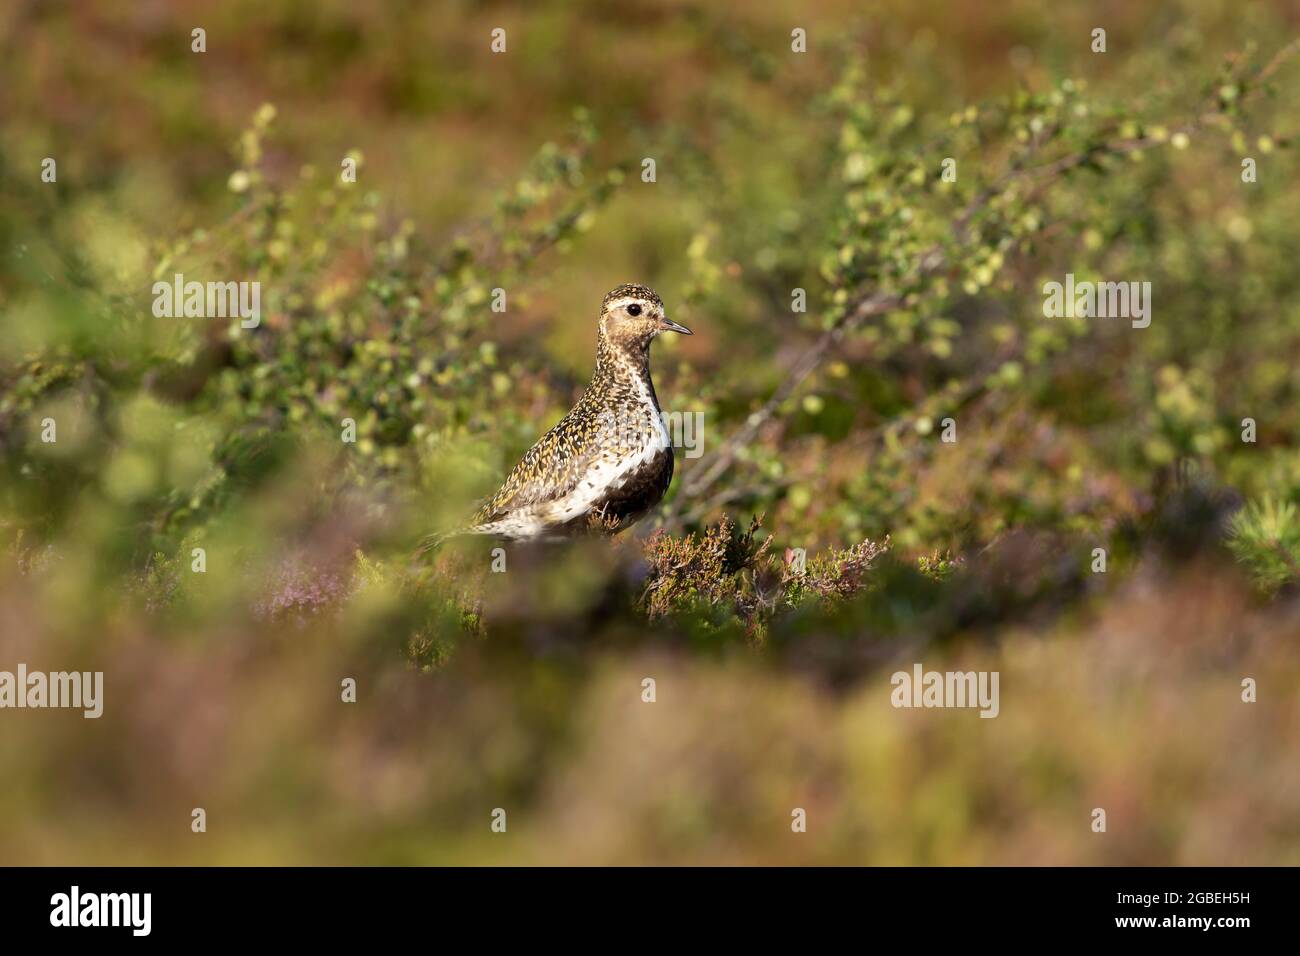 Adult European golden plover, Pluvialis apricaria, standing in its habitat in Finnish wild nature at Riisitunturi National Park, Finland, Northern Eur Stock Photo